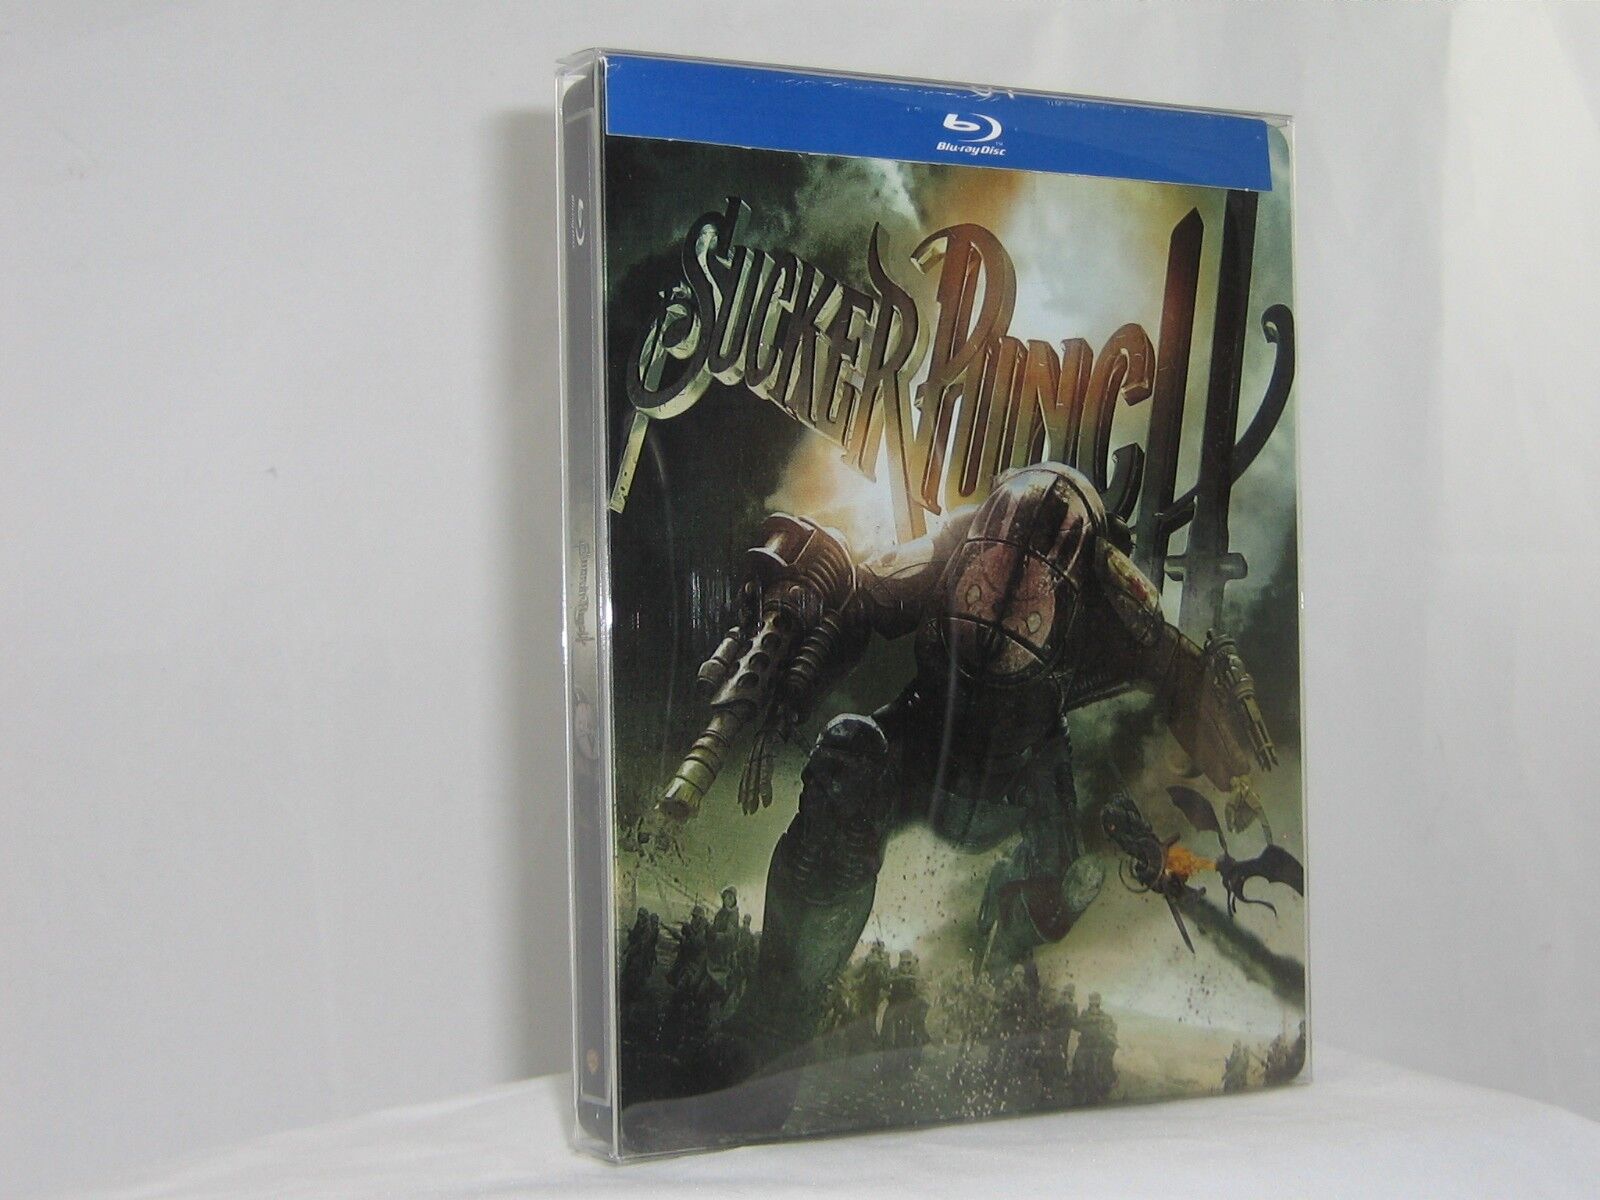 50 Steelbook Protective Sleeves / Slipcover box protectors plastic case / cover